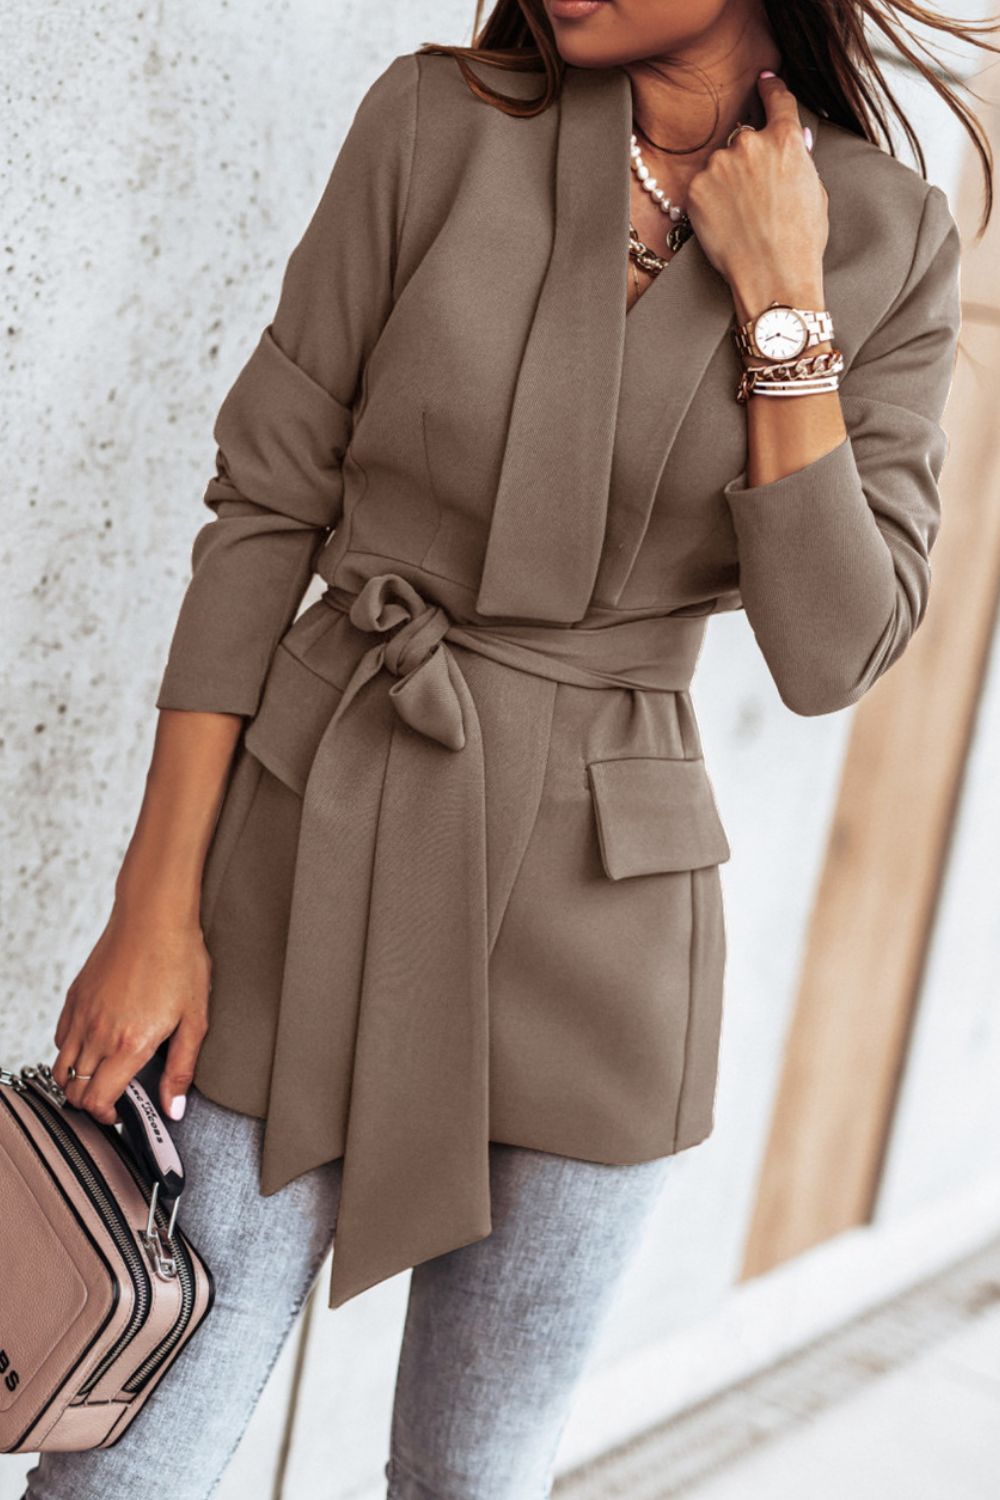 Belted Shawl Collar Blazer - Taupe / S Apparel & Accessories Girl Code